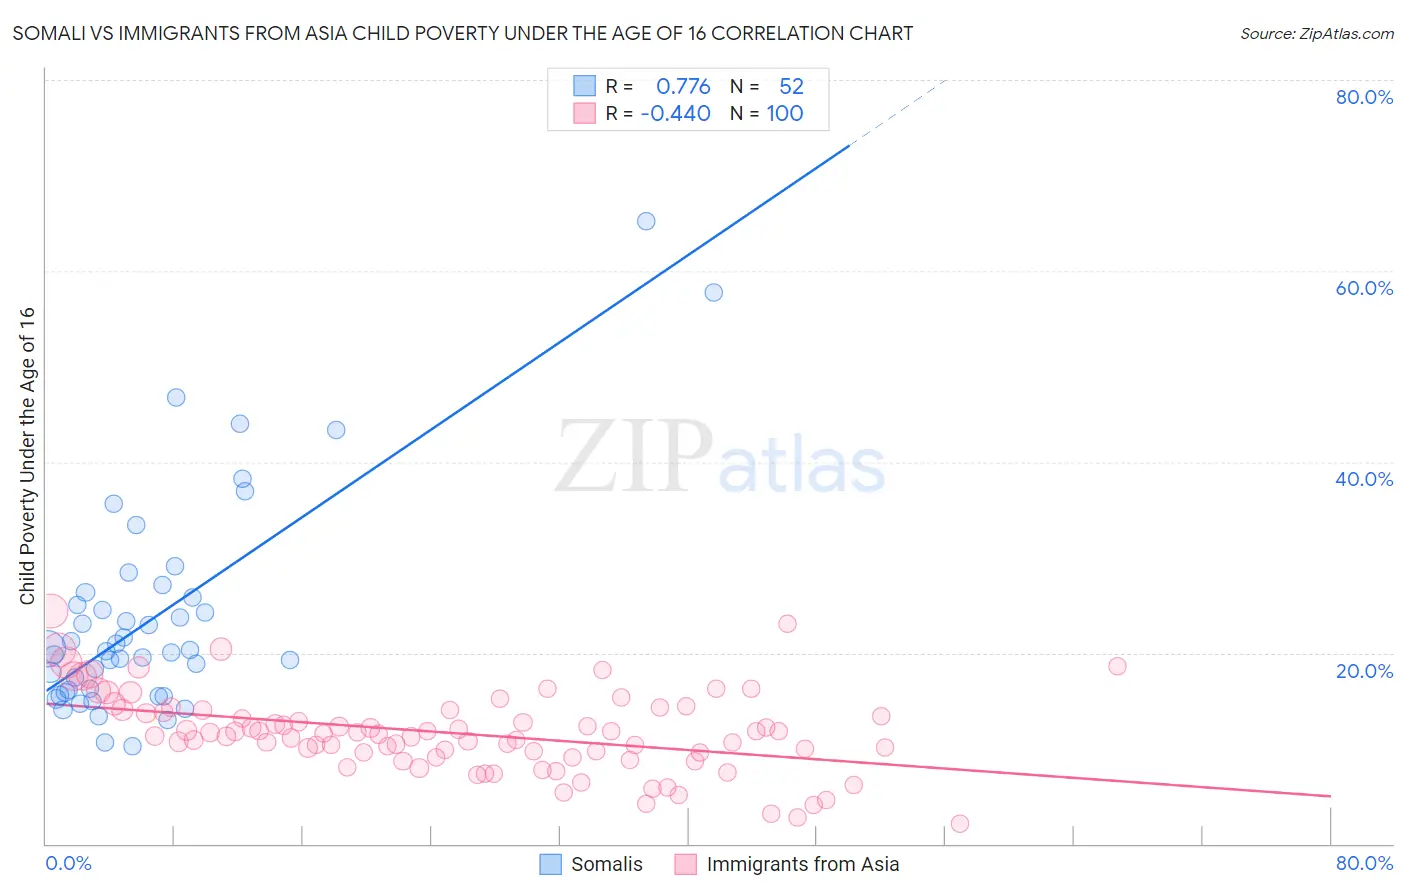 Somali vs Immigrants from Asia Child Poverty Under the Age of 16